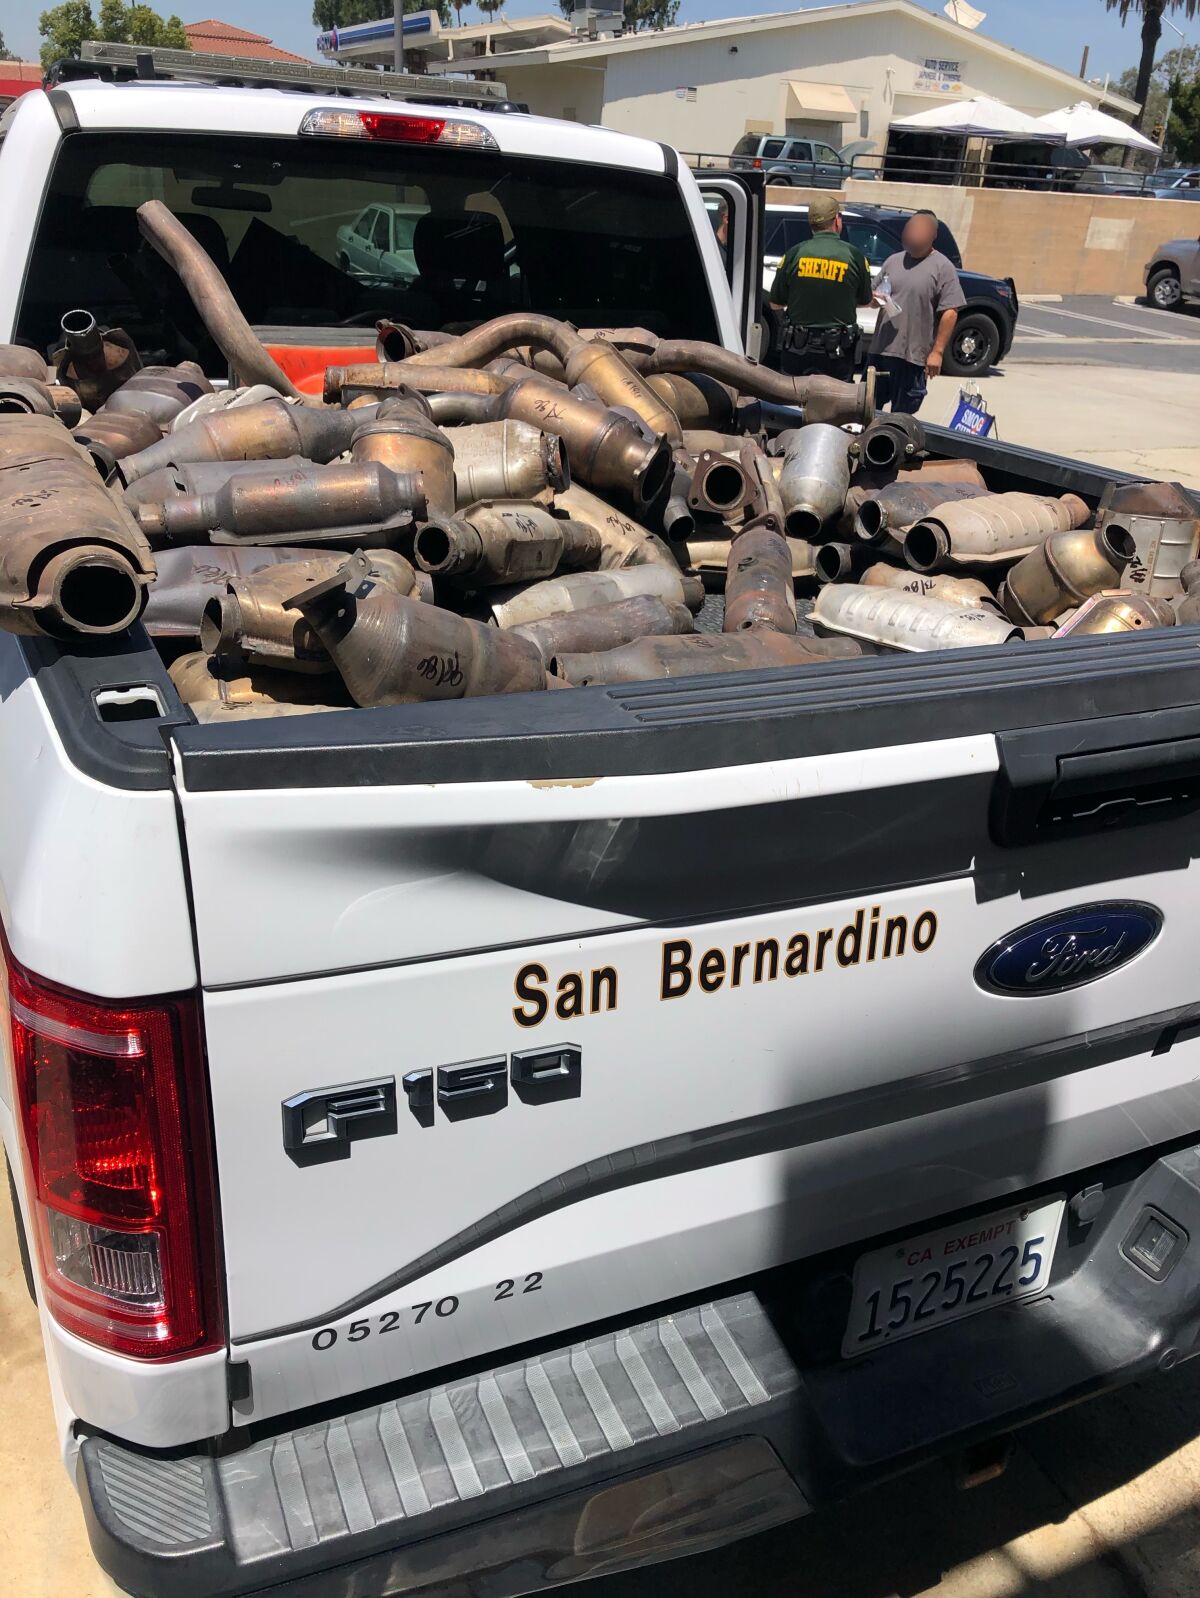 A truck bed filled with catalytic converters seized from Inland Empire businesses.